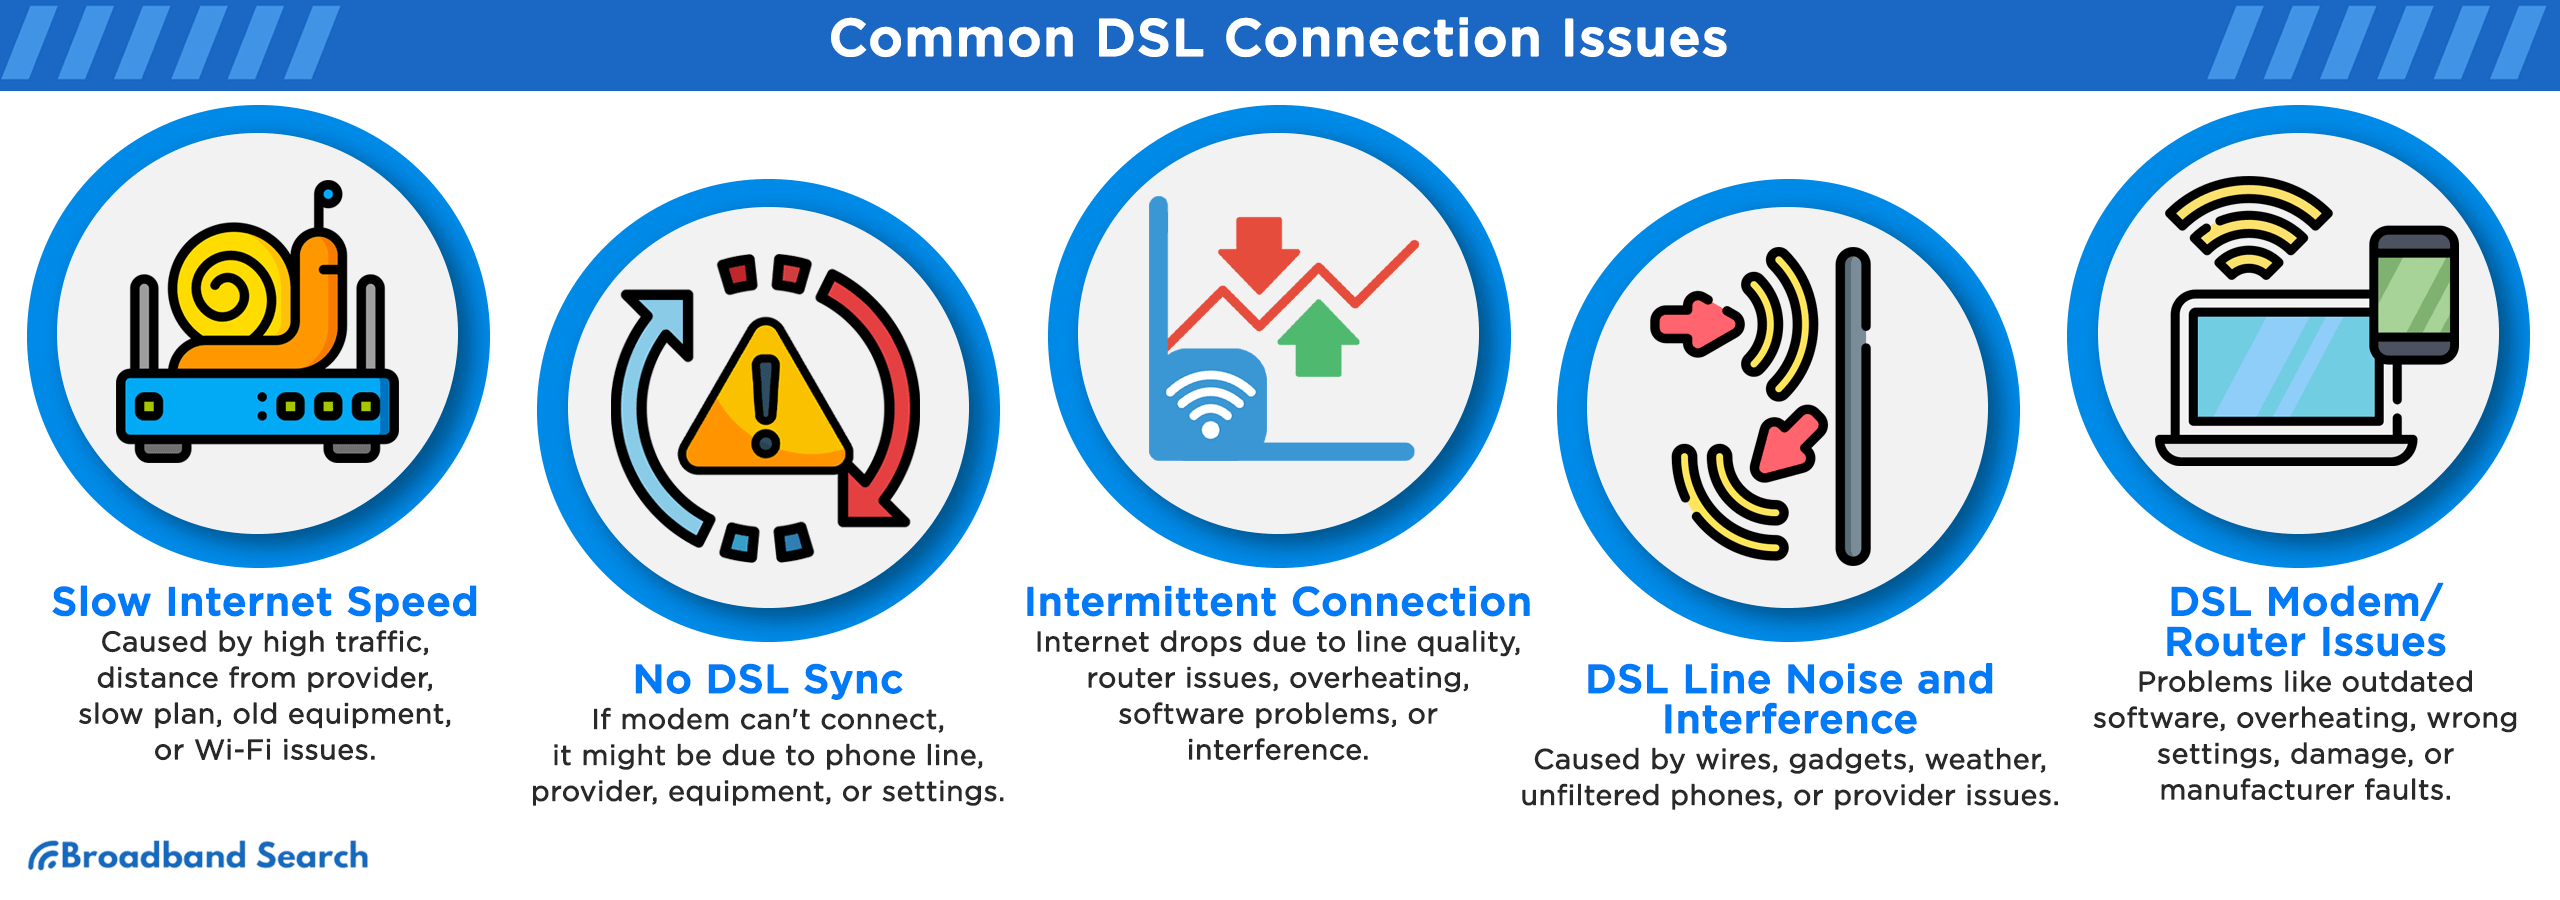 Common DSL connection issues